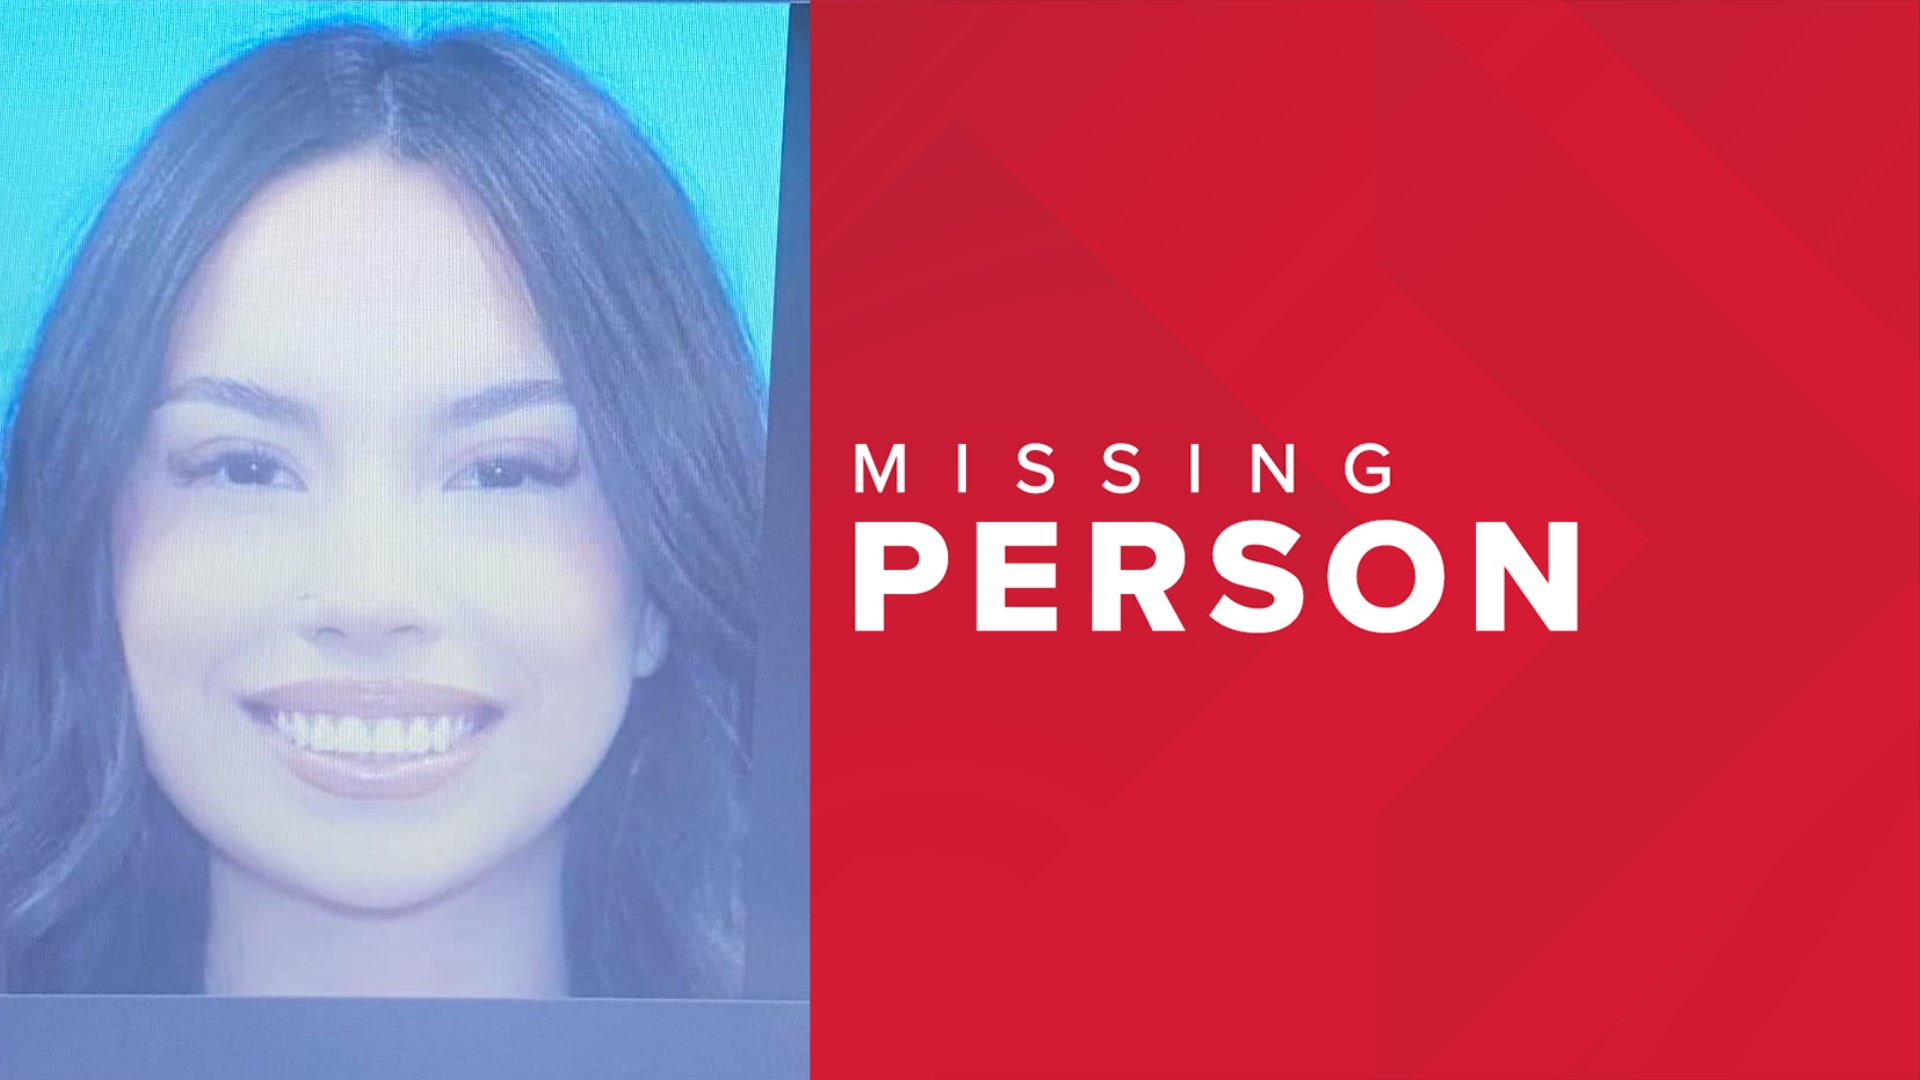 21-year-old Madeline Molina Pantoja was last seen on May 10 around 11:00p.m. at 1711 West Francis.